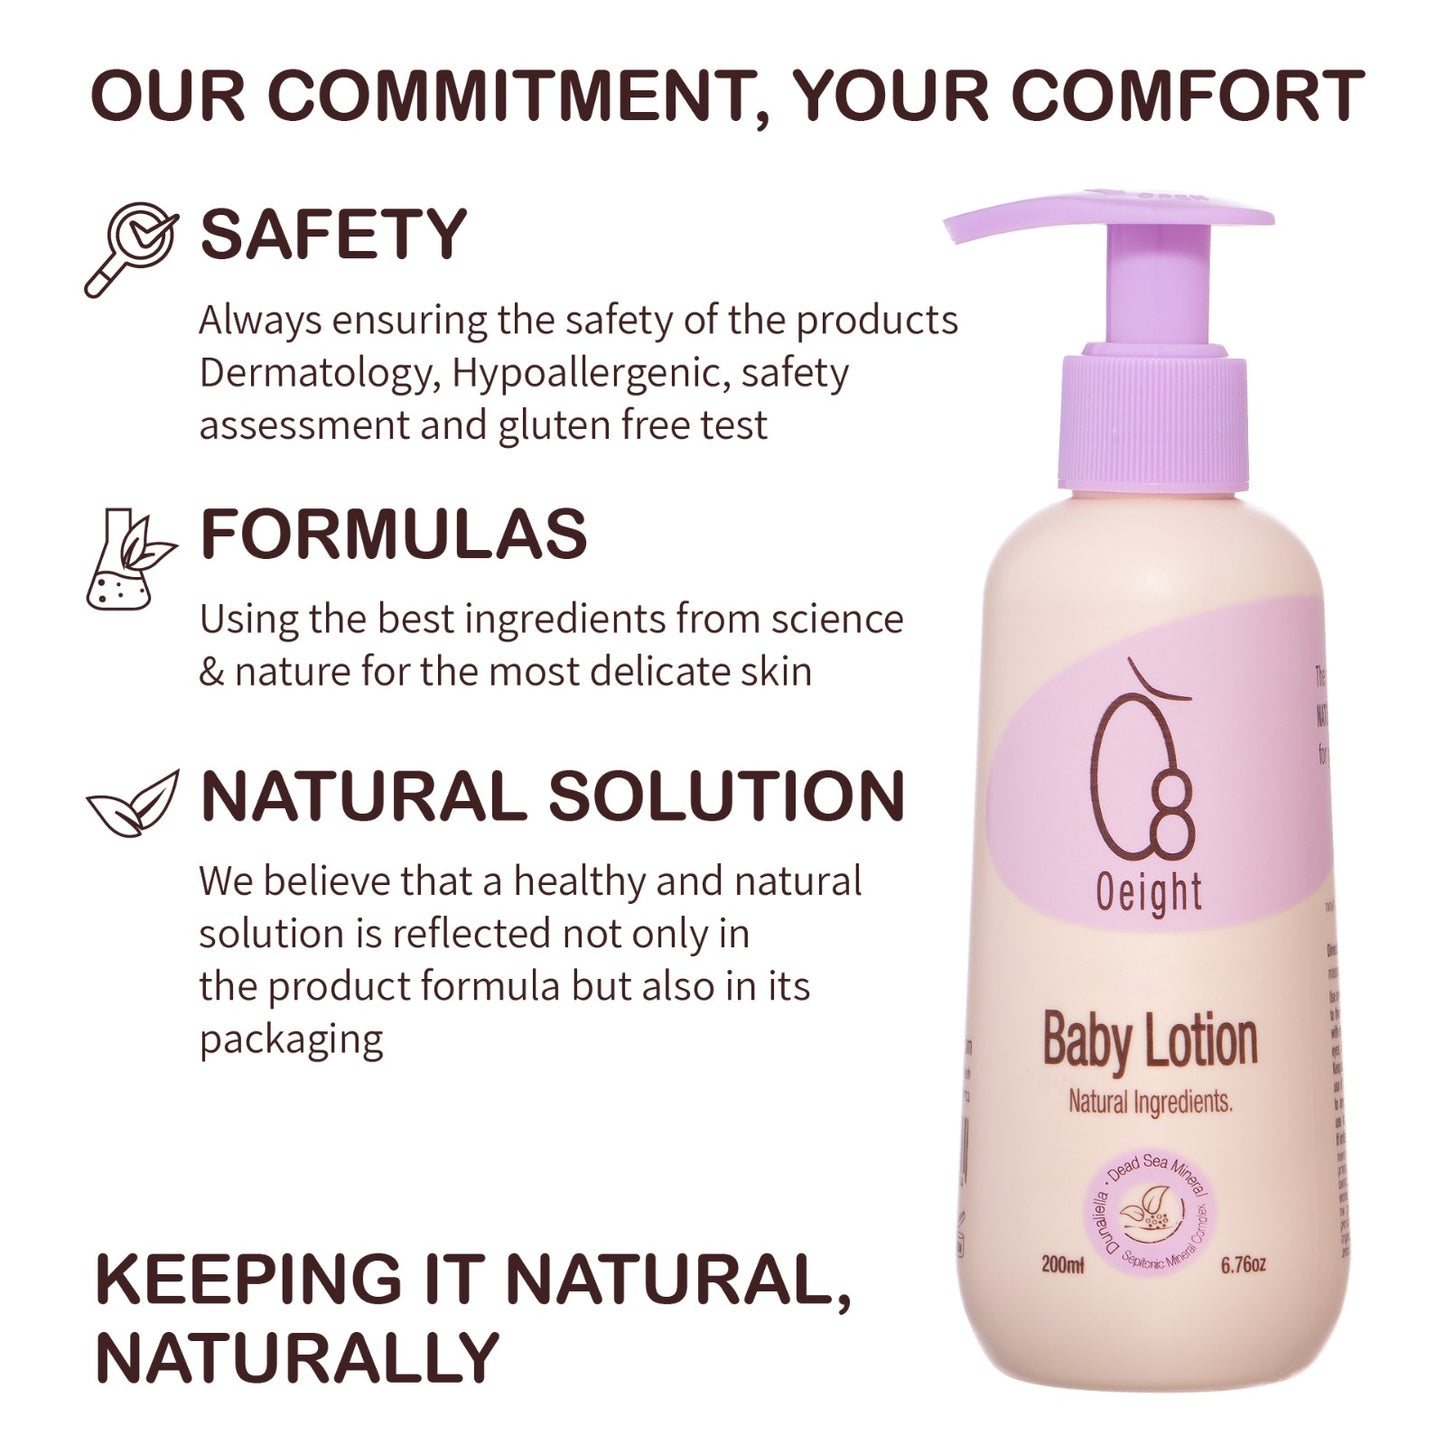 O8 Oeight Baby Lotion: Natural Body Skin Moisturizer with Dunaliella Salina, Dead Sea Minerals, Soothes, Softens, Nourishes, Protects Skin, 6.76 Oz